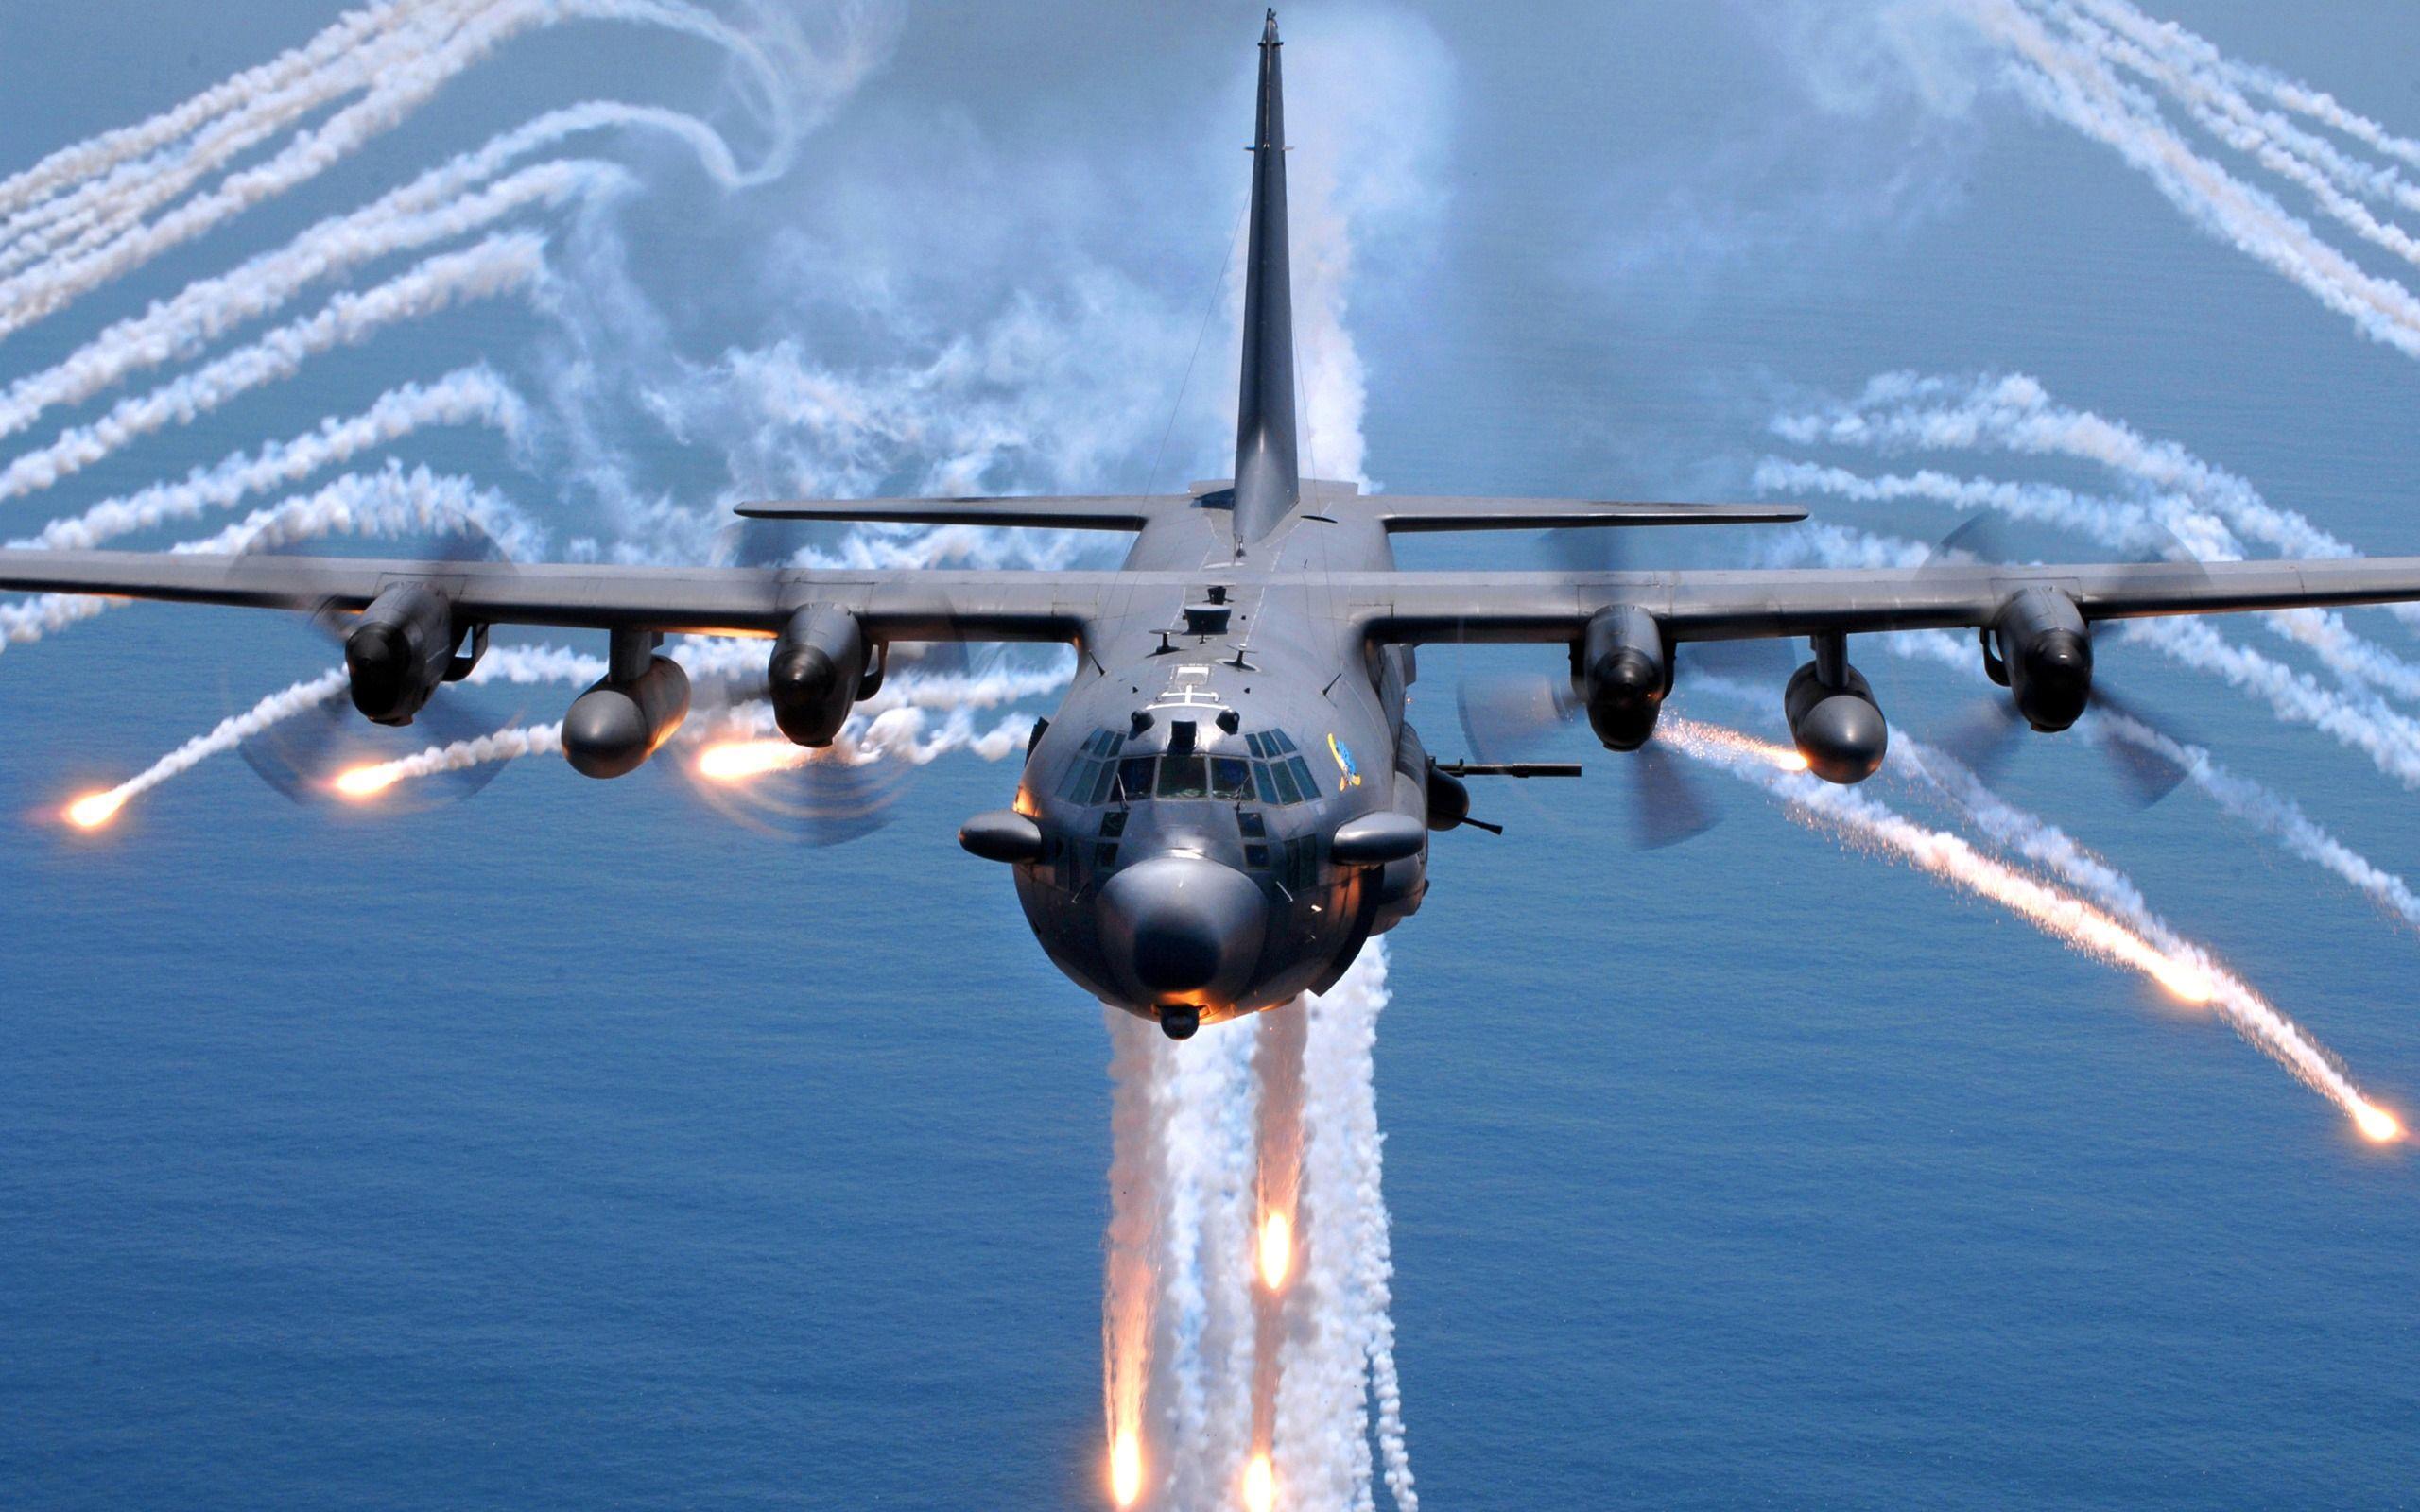 Lockheed AC 130 Wallpapers Military Aircrafts Planes Wallpapers in